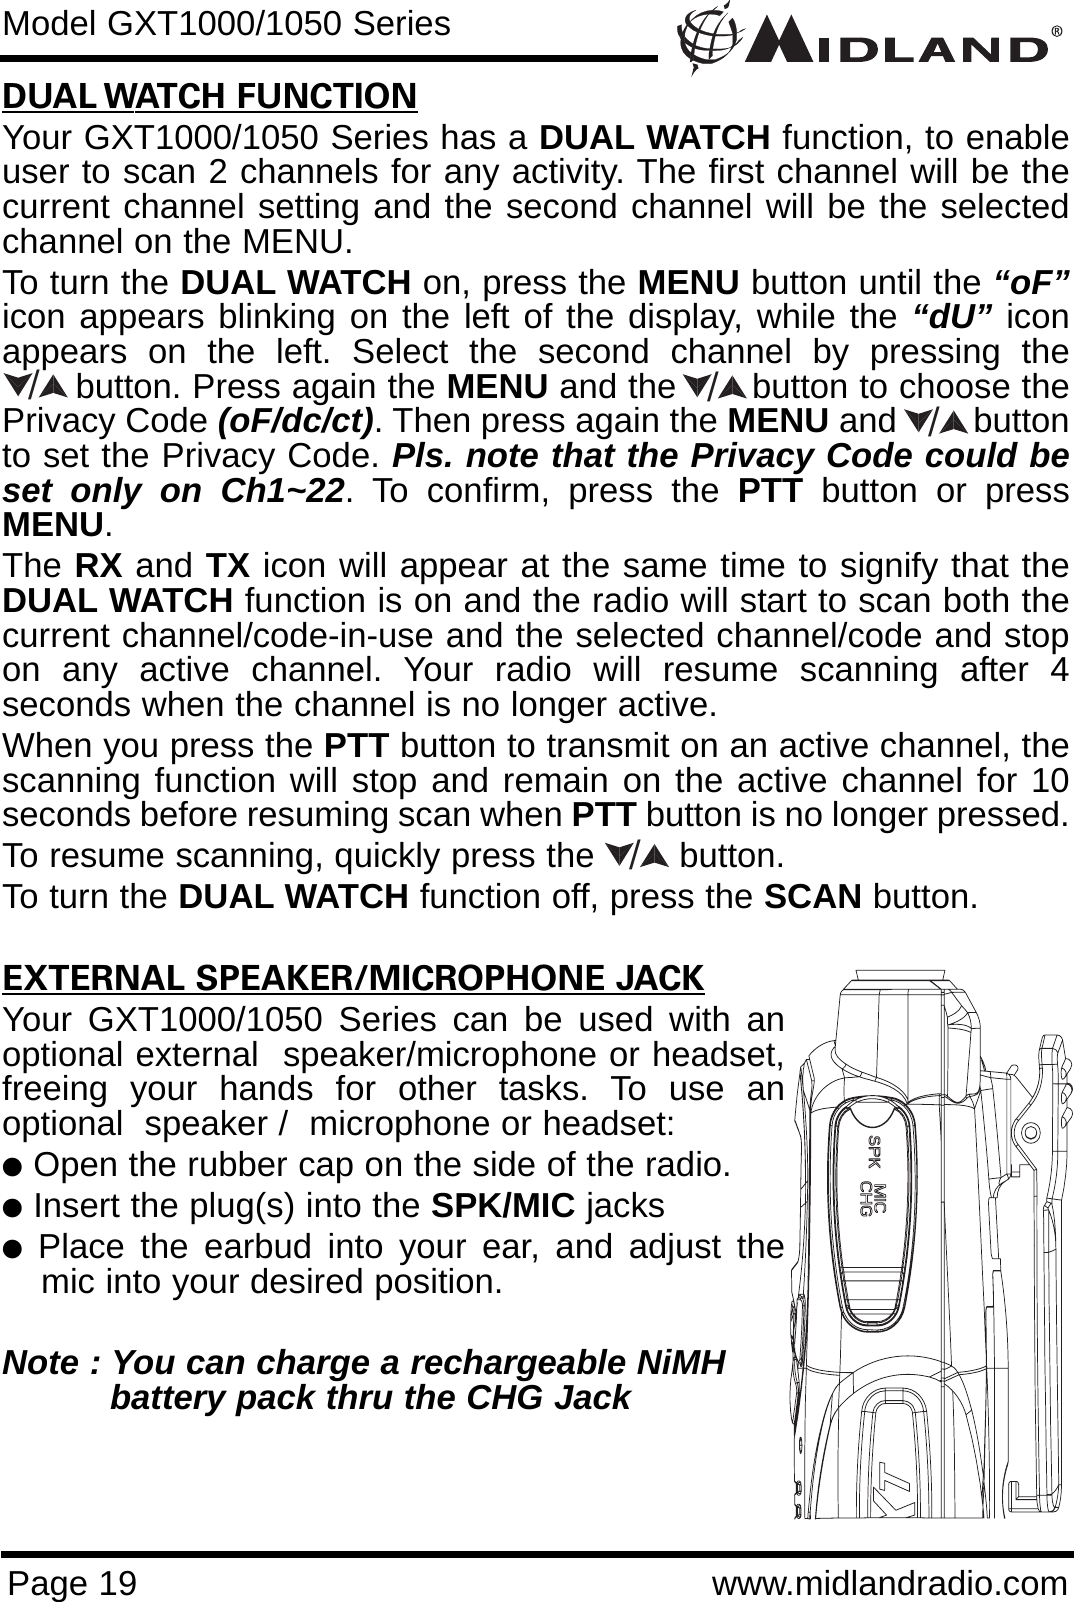 Page 19 www.midlandradio.comDUAL WATCH FUNCTIONYour GXT1000/1050 Series has a DUAL WATCH function, to enableuser to scan 2 channels for any activity. The first channel will be thecurrent channel setting and the second channel will be the selectedchannel on the MENU.To turn the DUAL WATCH on, press the MENU button until the “oF”icon appears blinking on the left of the display, while the “dU” iconappears on the left. Select the second channel by pressing thebutton. Press again the MENU and the       button to choose thePrivacy Code (oF/dc/ct). Then press again the MENU and        buttonto set the Privacy Code. Pls. note that the Privacy Code could beset only on Ch1~22. To confirm, press the PTT button or pressMENU.The RX and TX icon will appear at the same time to signify that theDUAL WATCH function is on and the radio will start to scan both thecurrent channel/code-in-use and the selected channel/code and stopon any active channel. Your radio will resume scanning after 4seconds when the channel is no longer active.When you press the PTT button to transmit on an active channel, thescanning function will stop and remain on the active channel for 10seconds before resuming scan when PTT button is no longer pressed. To resume scanning, quickly press the  button.To turn the DUAL WATCH function off, press the SCAN button. EXTERNAL SPEAKER/MICROPHONE JACKYour GXT1000/1050 Series can be used with anoptional external  speaker/microphone or headset,freeing your hands for other tasks. To use anoptional  speaker /  microphone or headset:lOpen the rubber cap on the side of the radio.lInsert the plug(s) into the SPK/MIC jackslPlace the earbud into your ear, and adjust themic into your desired position.Note : You can charge a rechargeable NiMH battery pack thru the CHG Jack Model GXT1000/1050 Series////